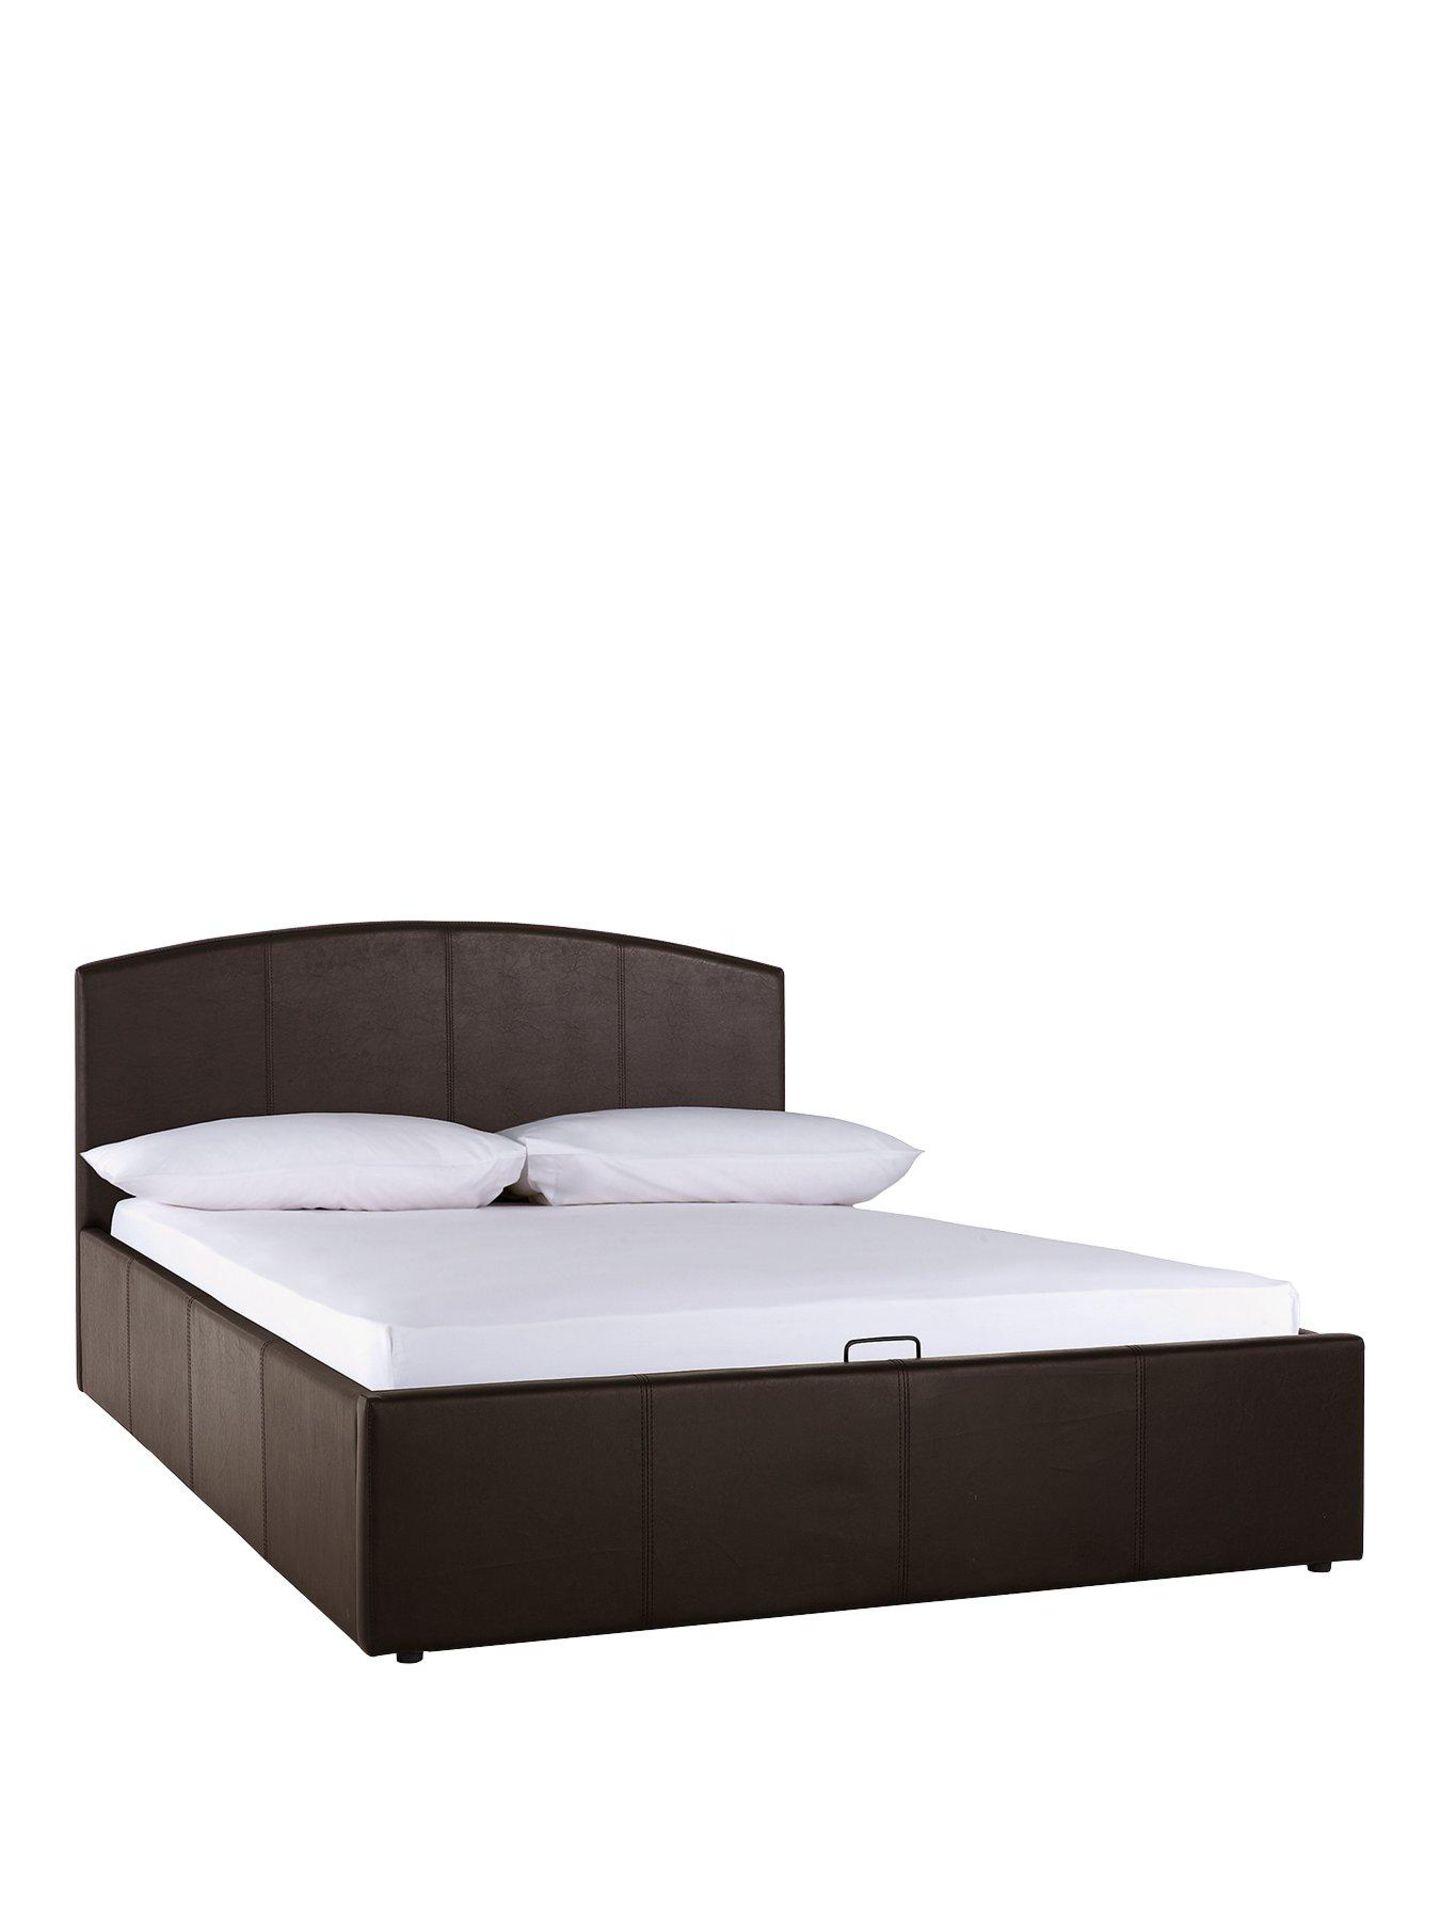 Boxed Item Marston King Lift-Up Bed [Chocolate] 88X159X212Cm Rrp:£658.0 - Image 2 of 2